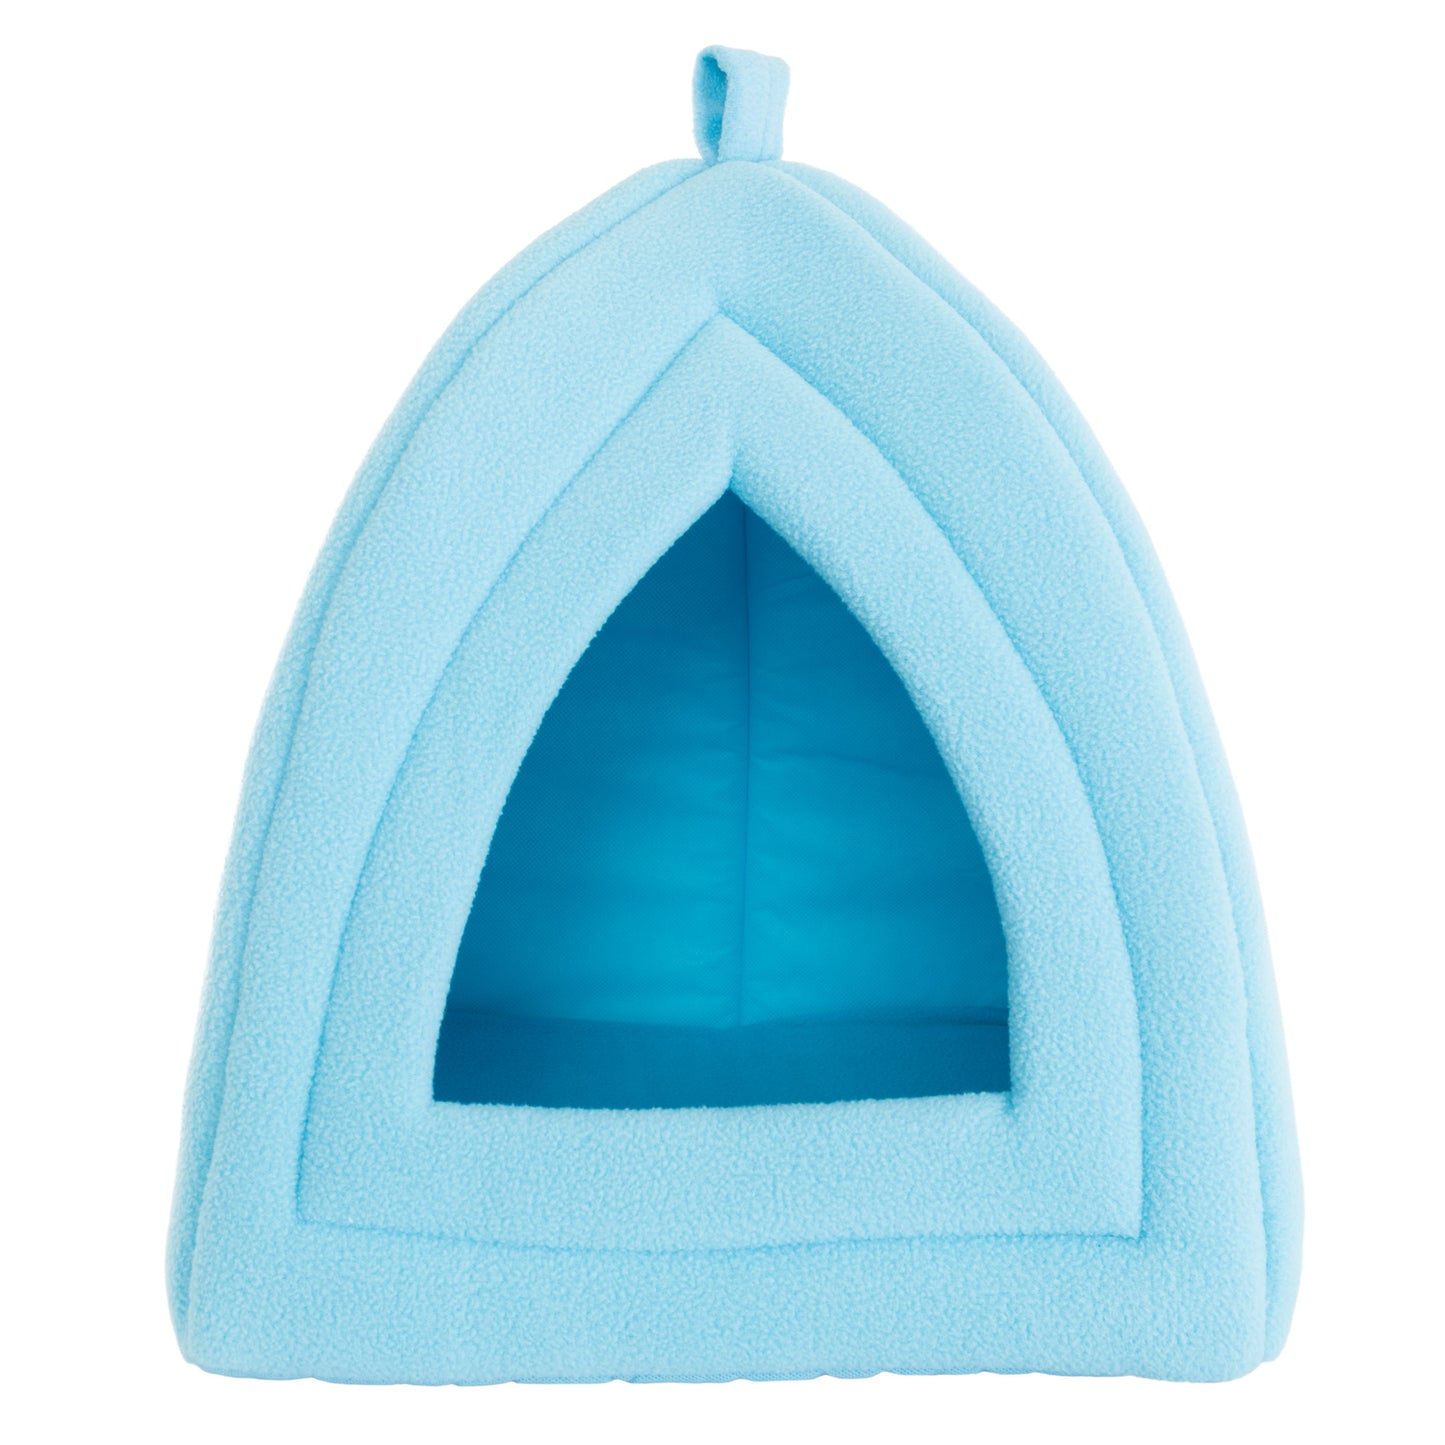 Cat House – Cat Beds for Indoor Cats with Removable Foam Cushion – Comfortable Pet Tent for Kittens, Small Dogs and Aging Pets by Petmaker (Blue)